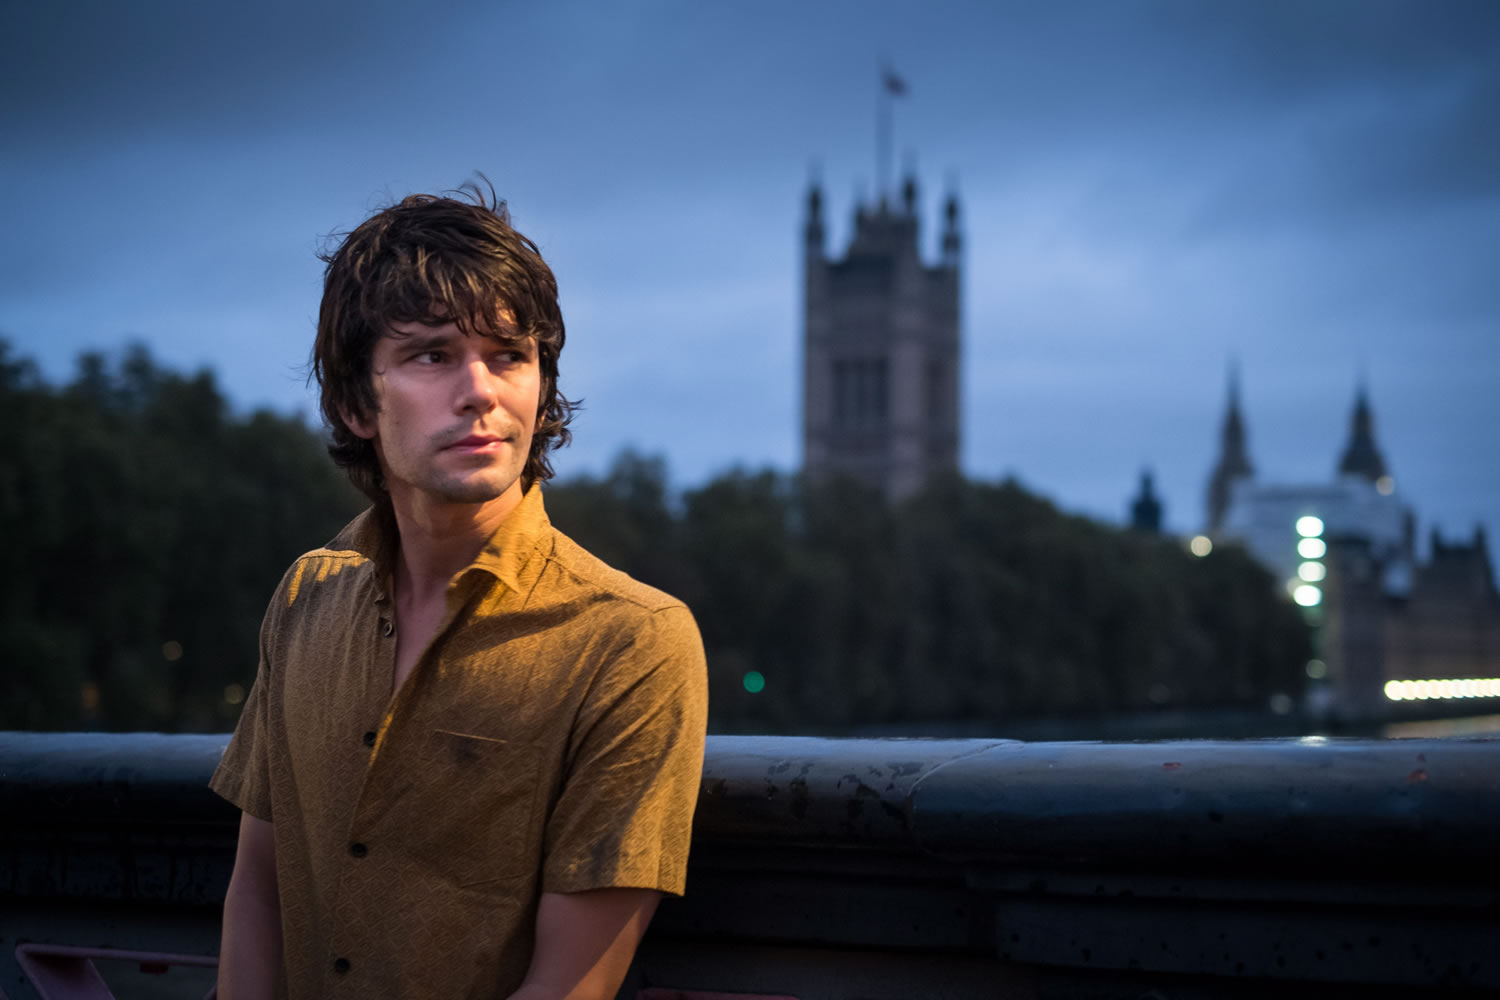 Ben Whishaw plays Danny in &quot;London Spy,&quot; a thriller that explores the morally ambivalent side of British espionage and power.